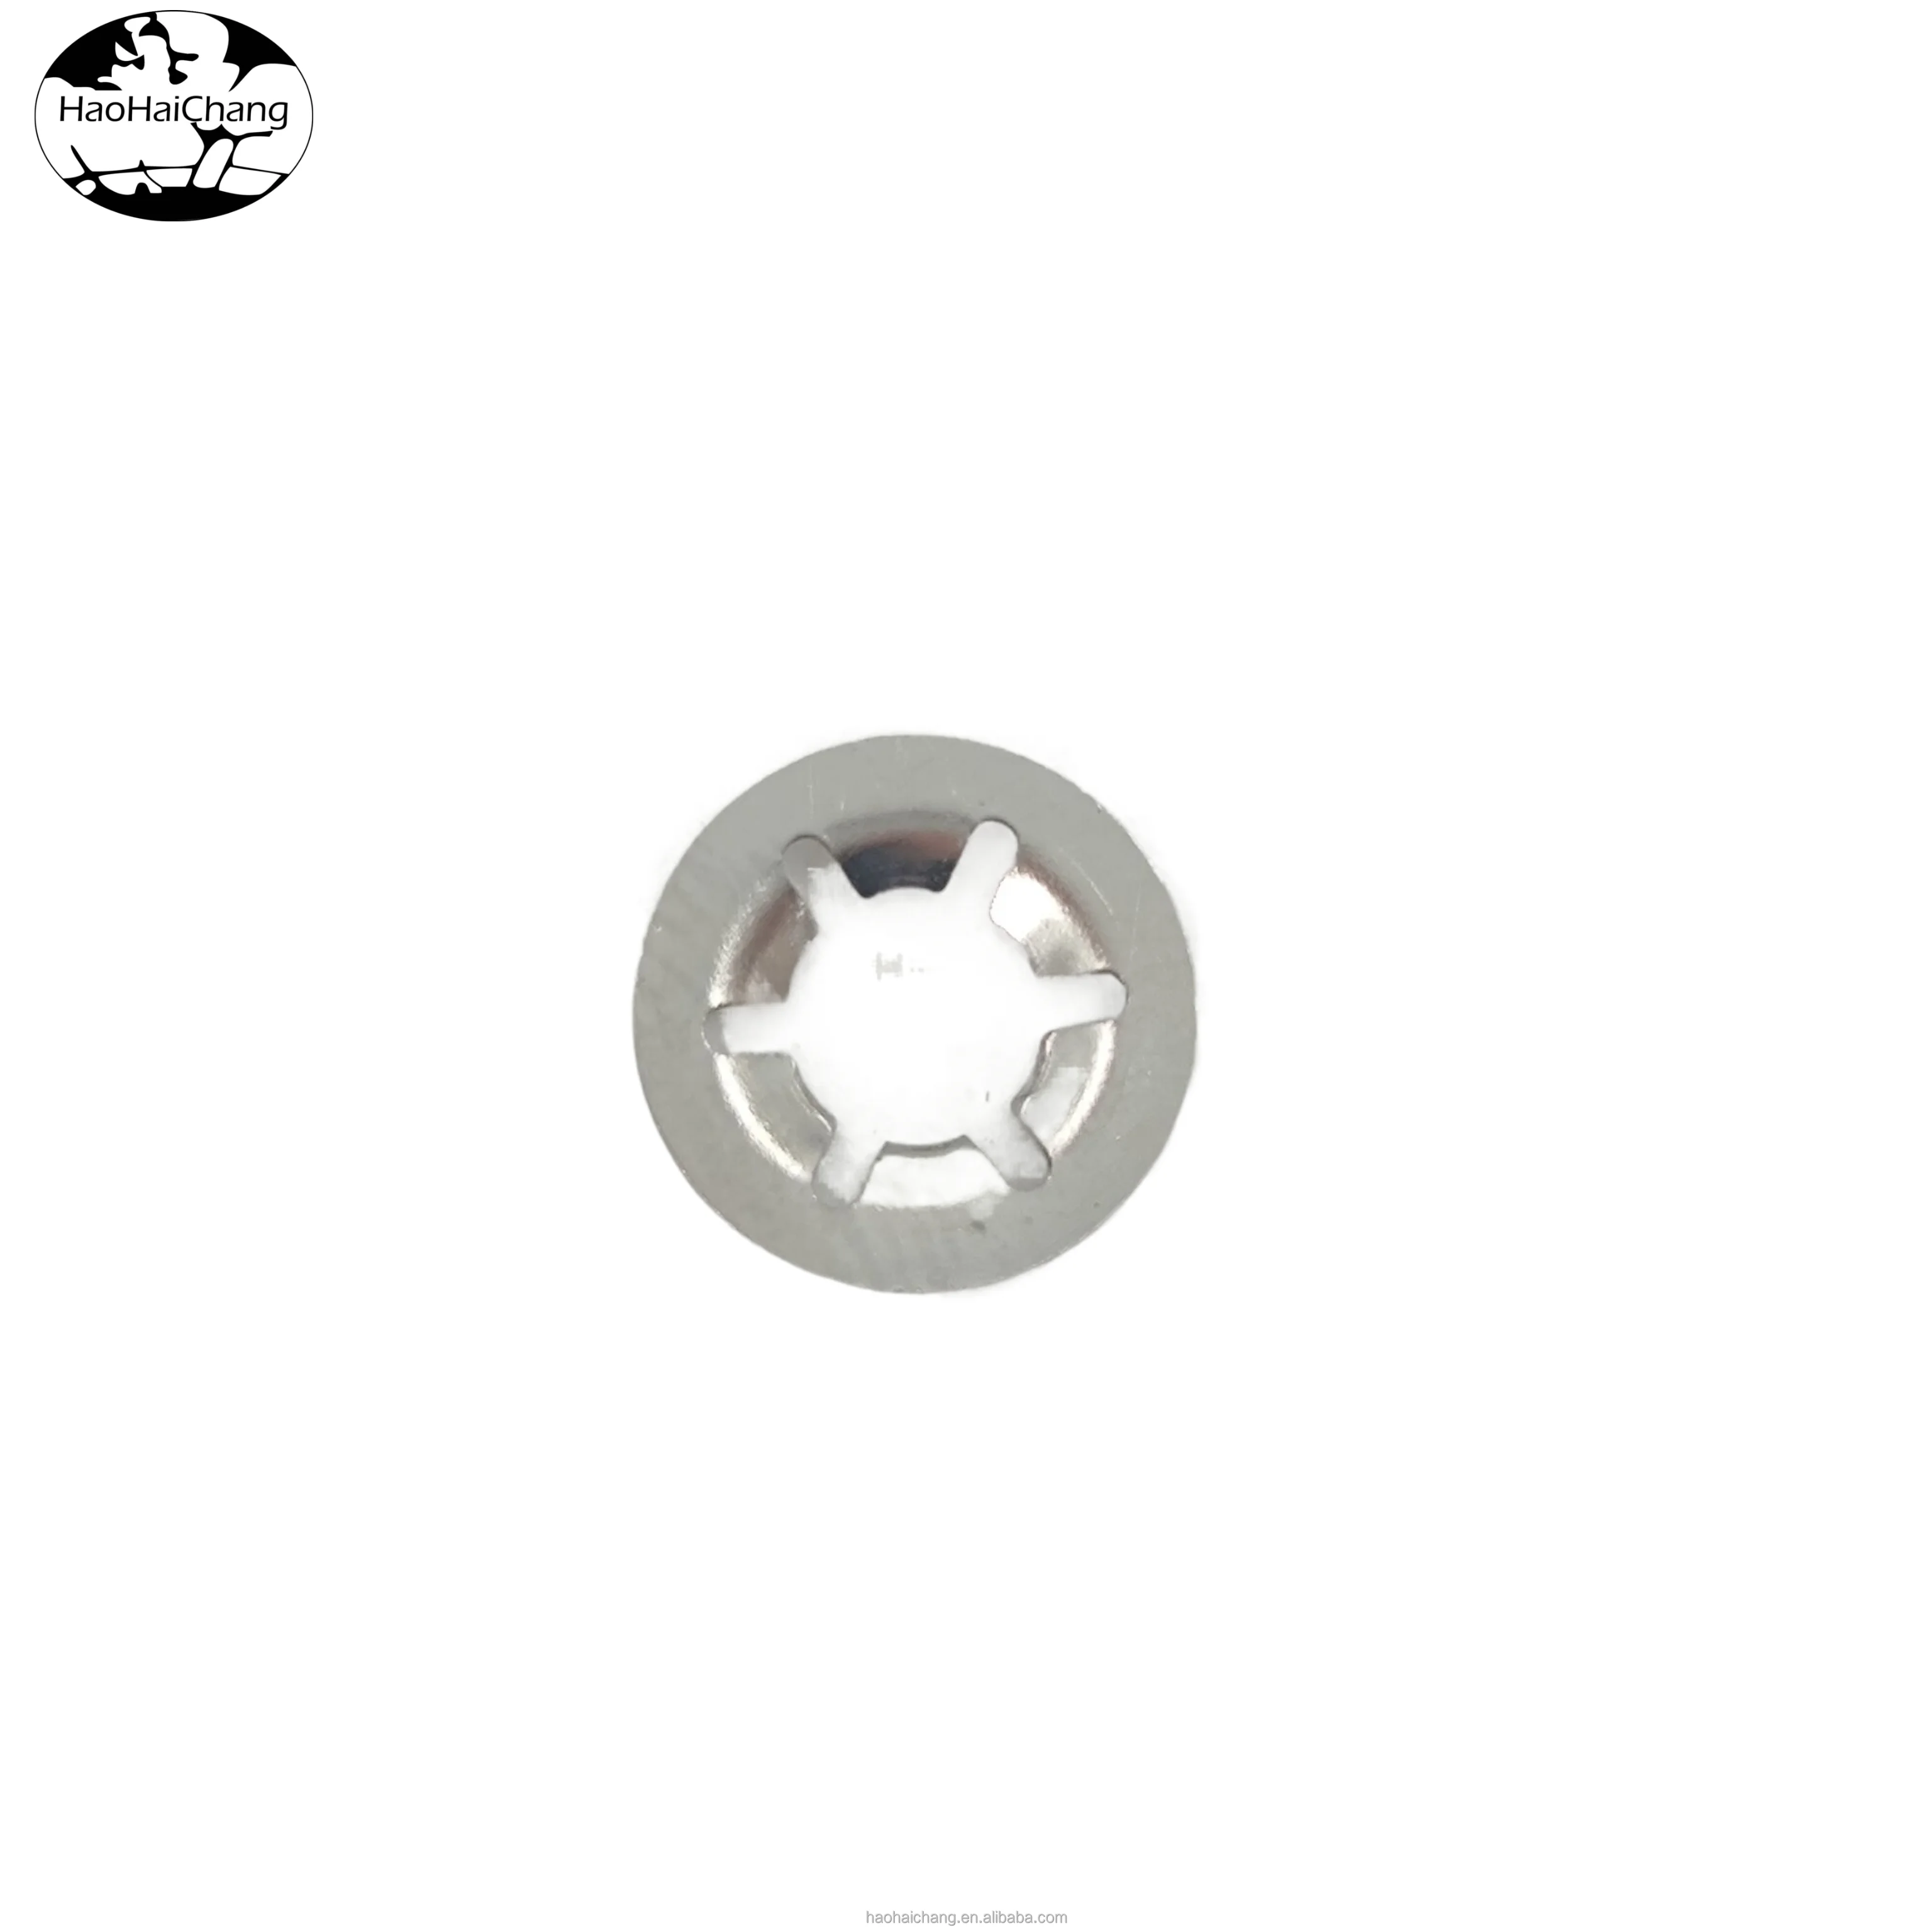 Customized precision stamping stainless steel internal gear gasket circlip plum lock washer (1600650772974)